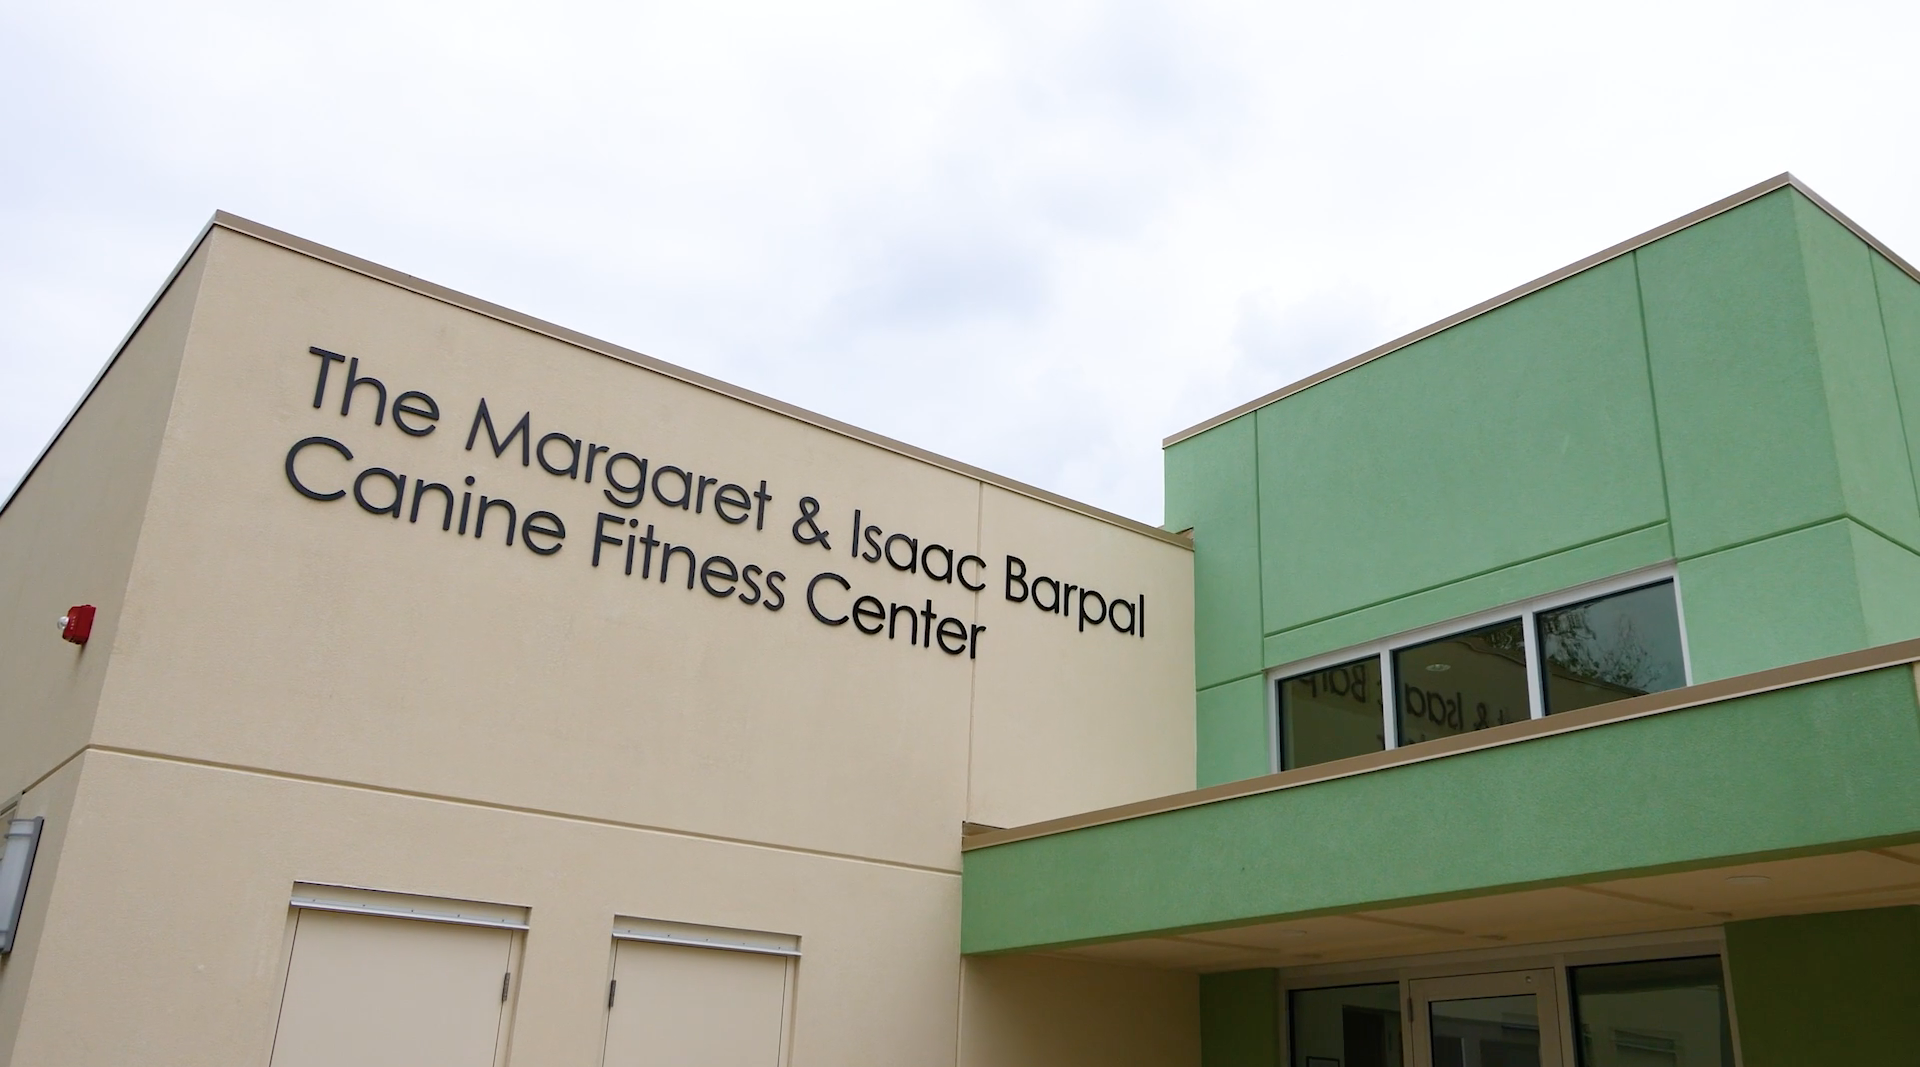 A screenshot from the grand opening of the Margaret and Isaac Barpal Canine Fitness Center on the campus of Southeastern Guide Dogs in Palmetto, Florida USA video.